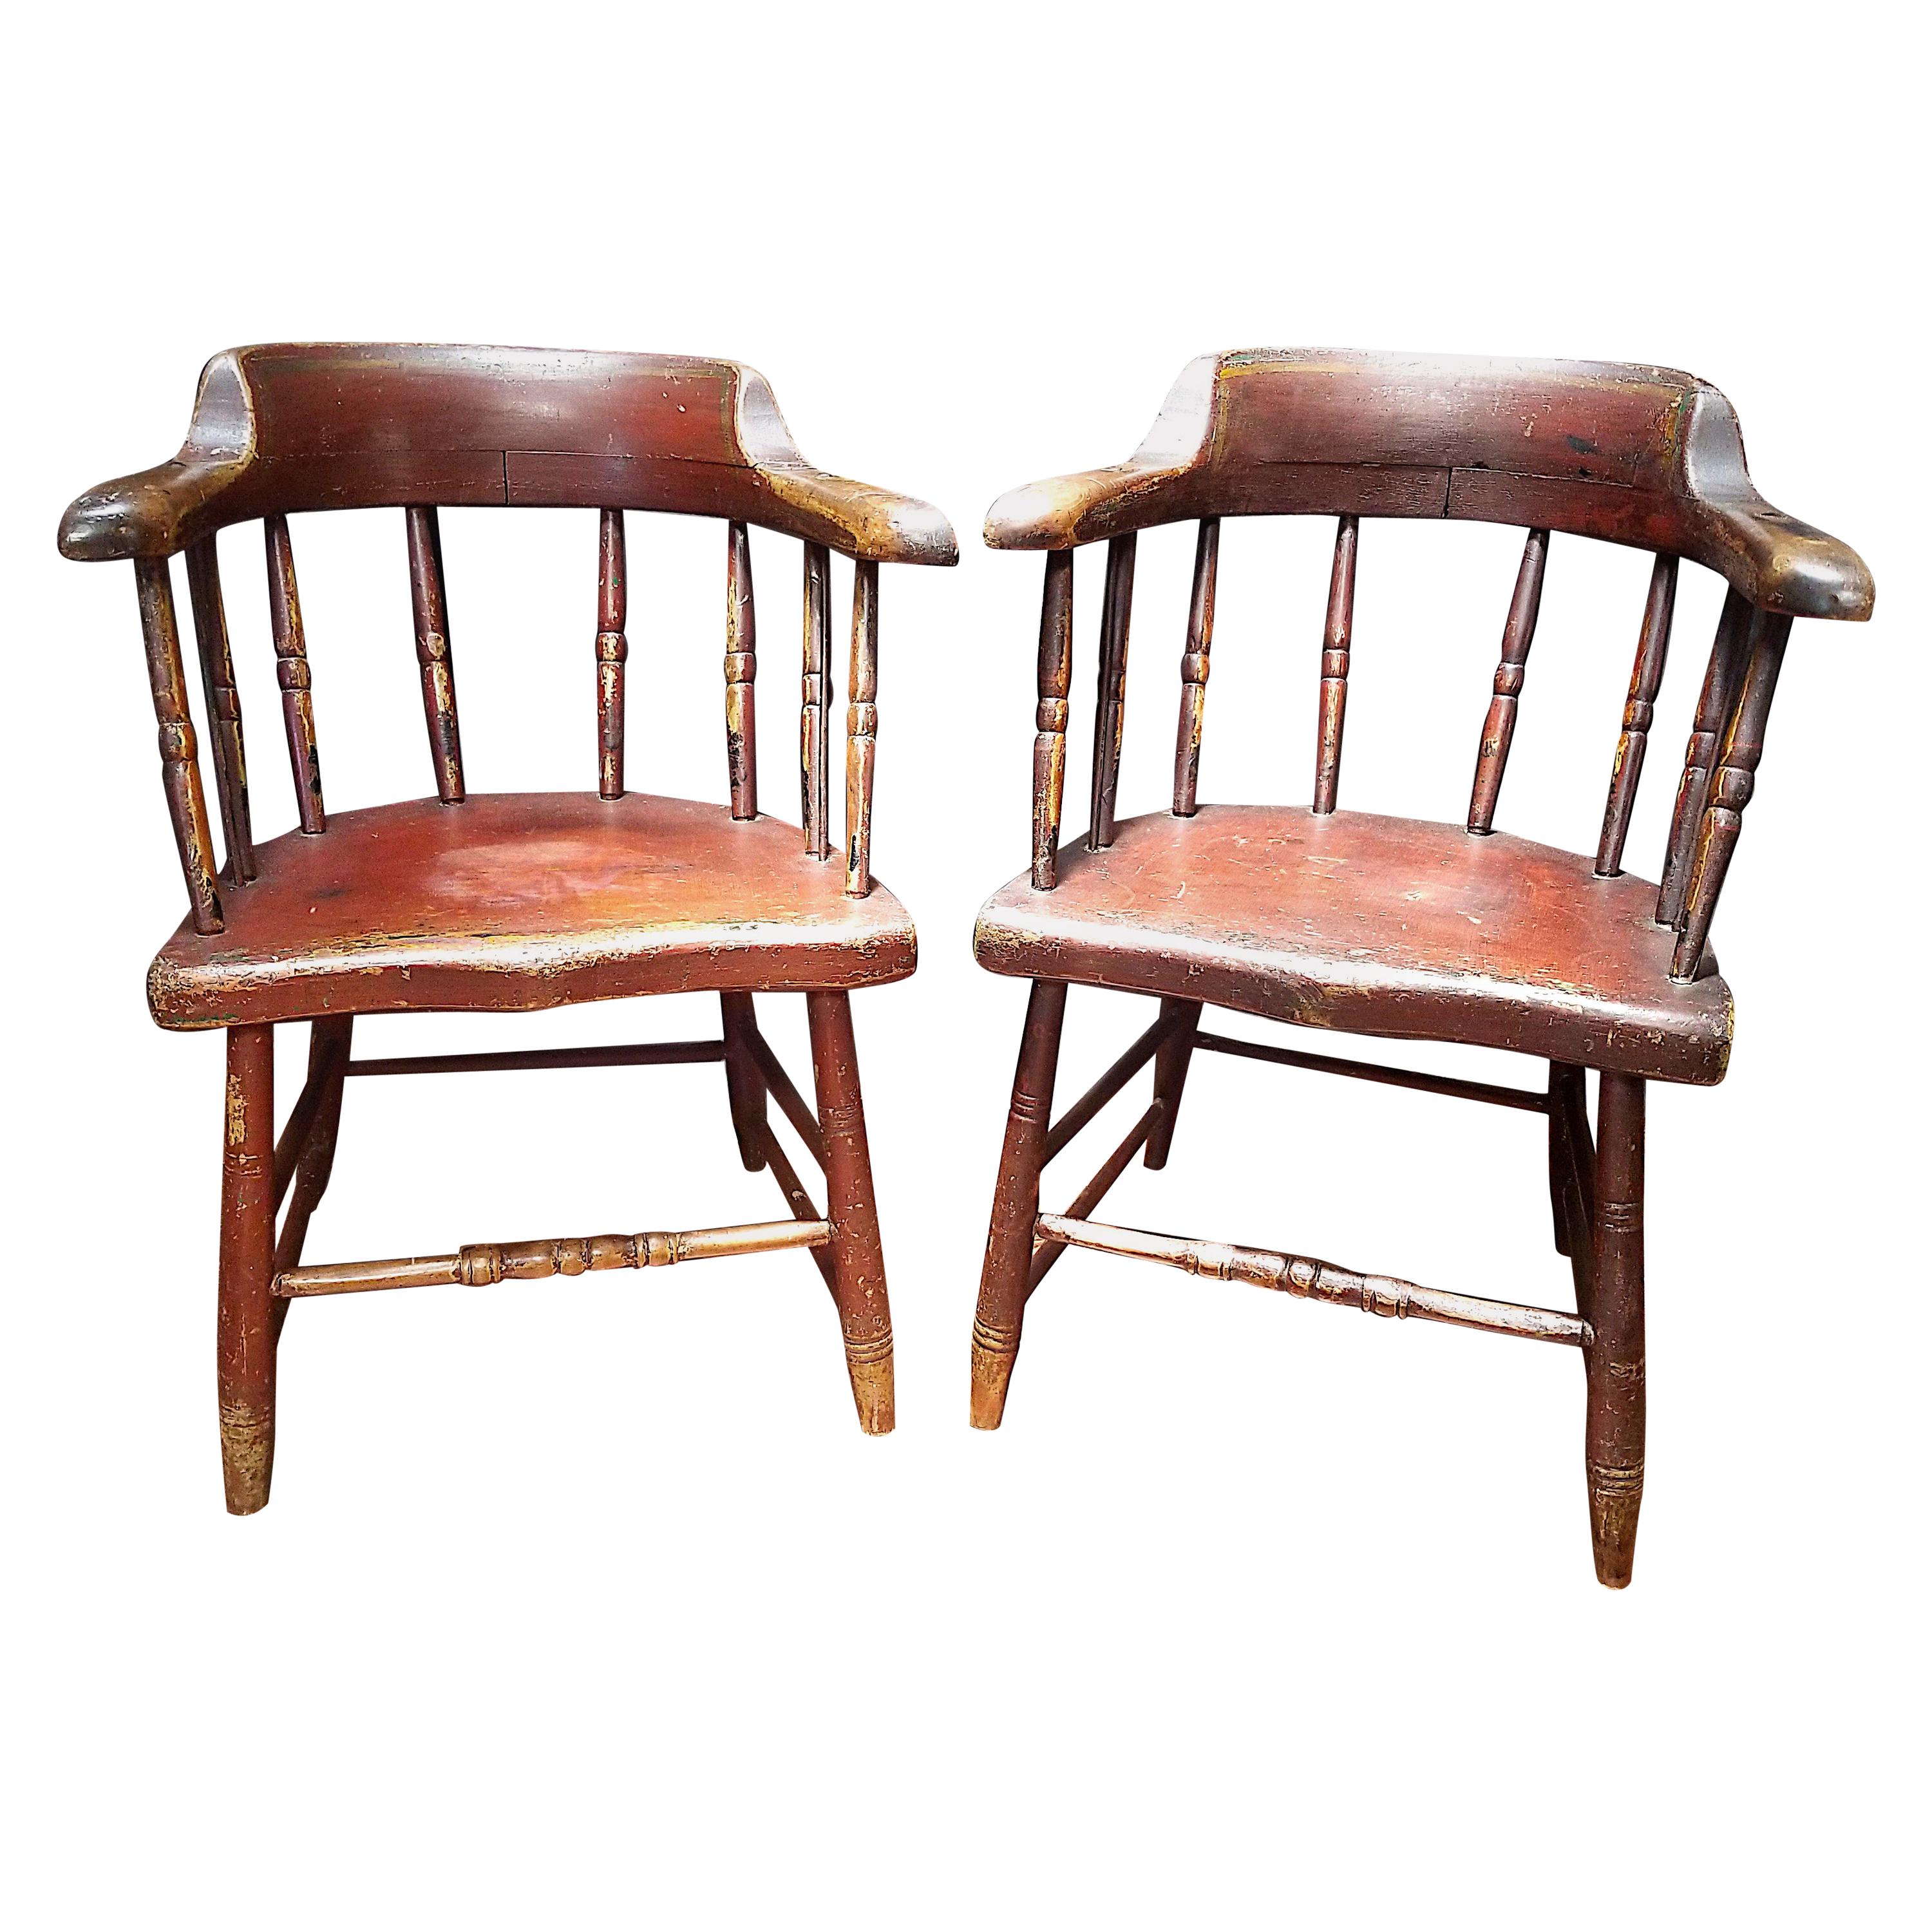 Pair of Painted Windsor Chairs